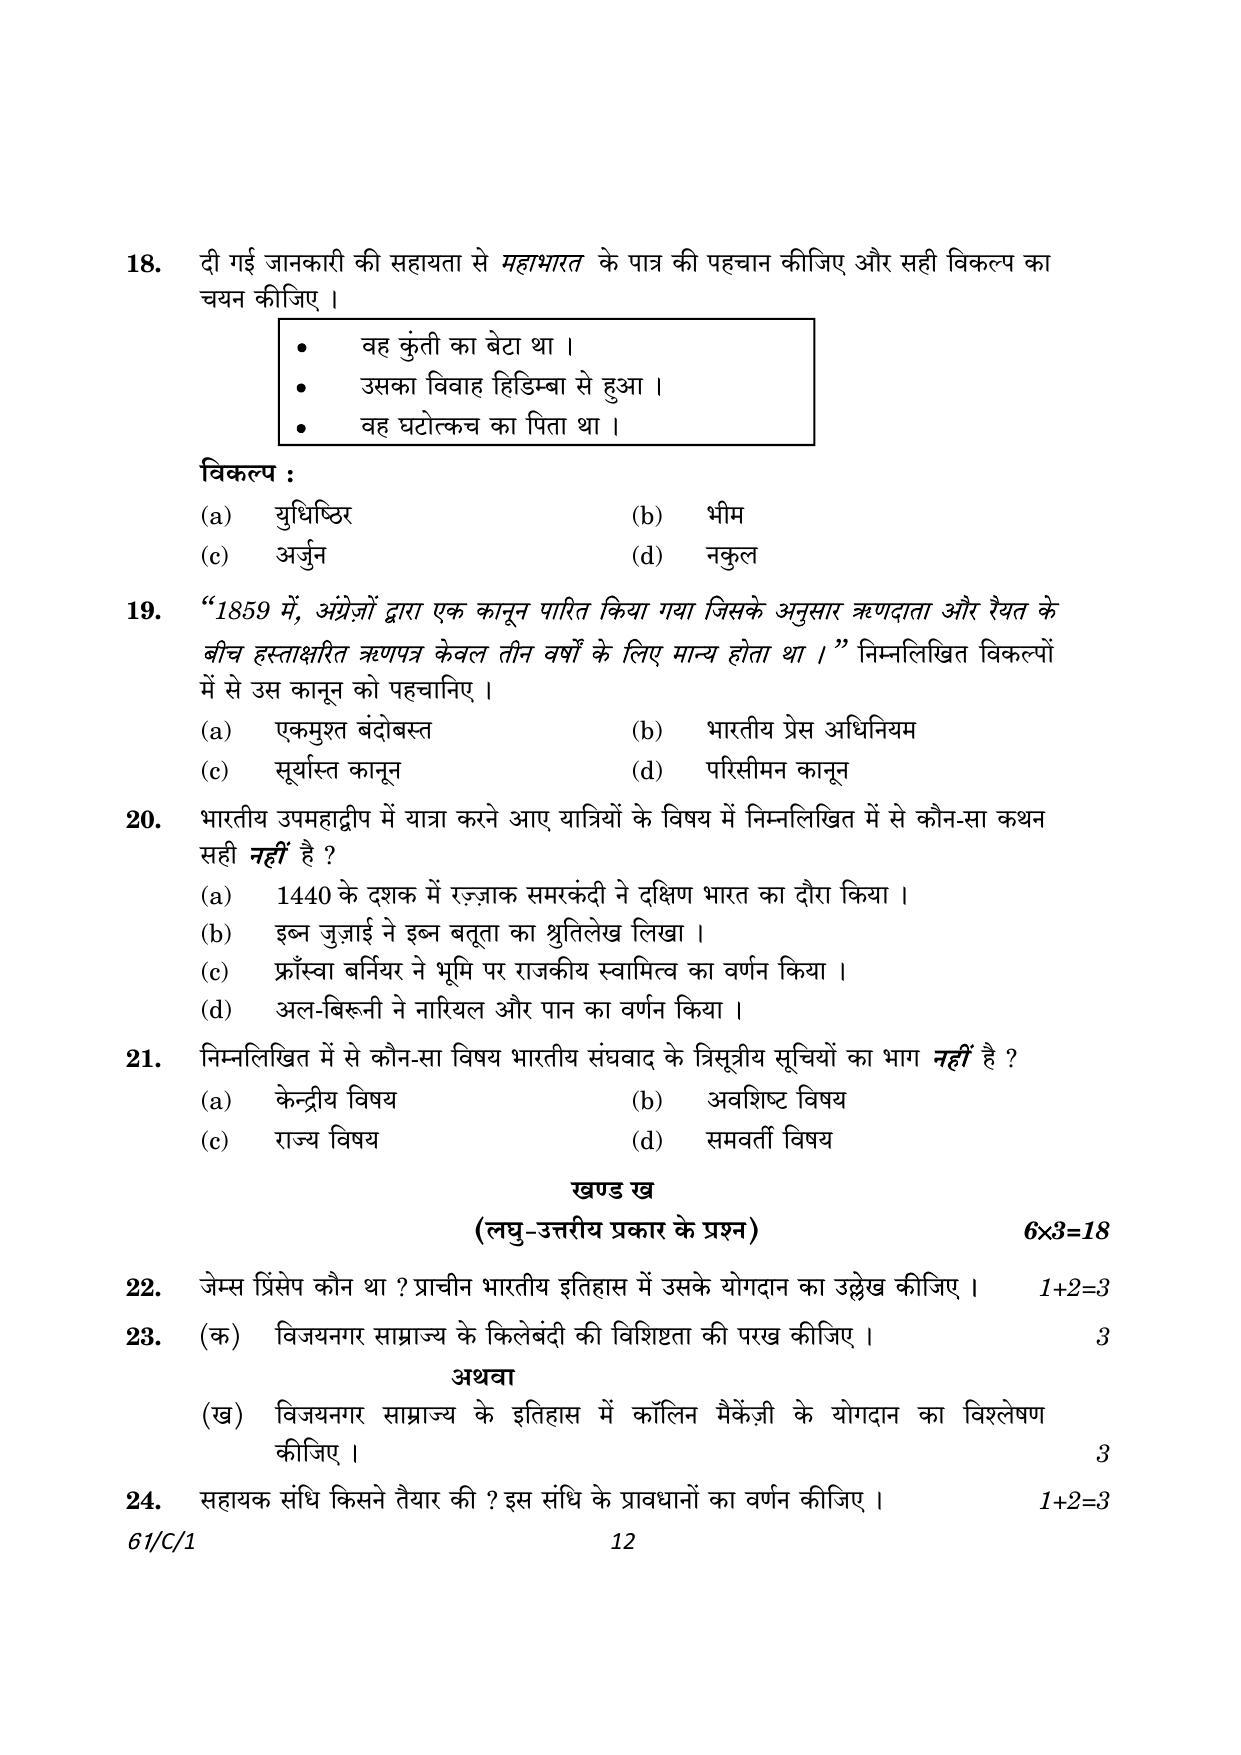 CBSE Class 12 61-1 History 2023 (Compartment) Question Paper - Page 12